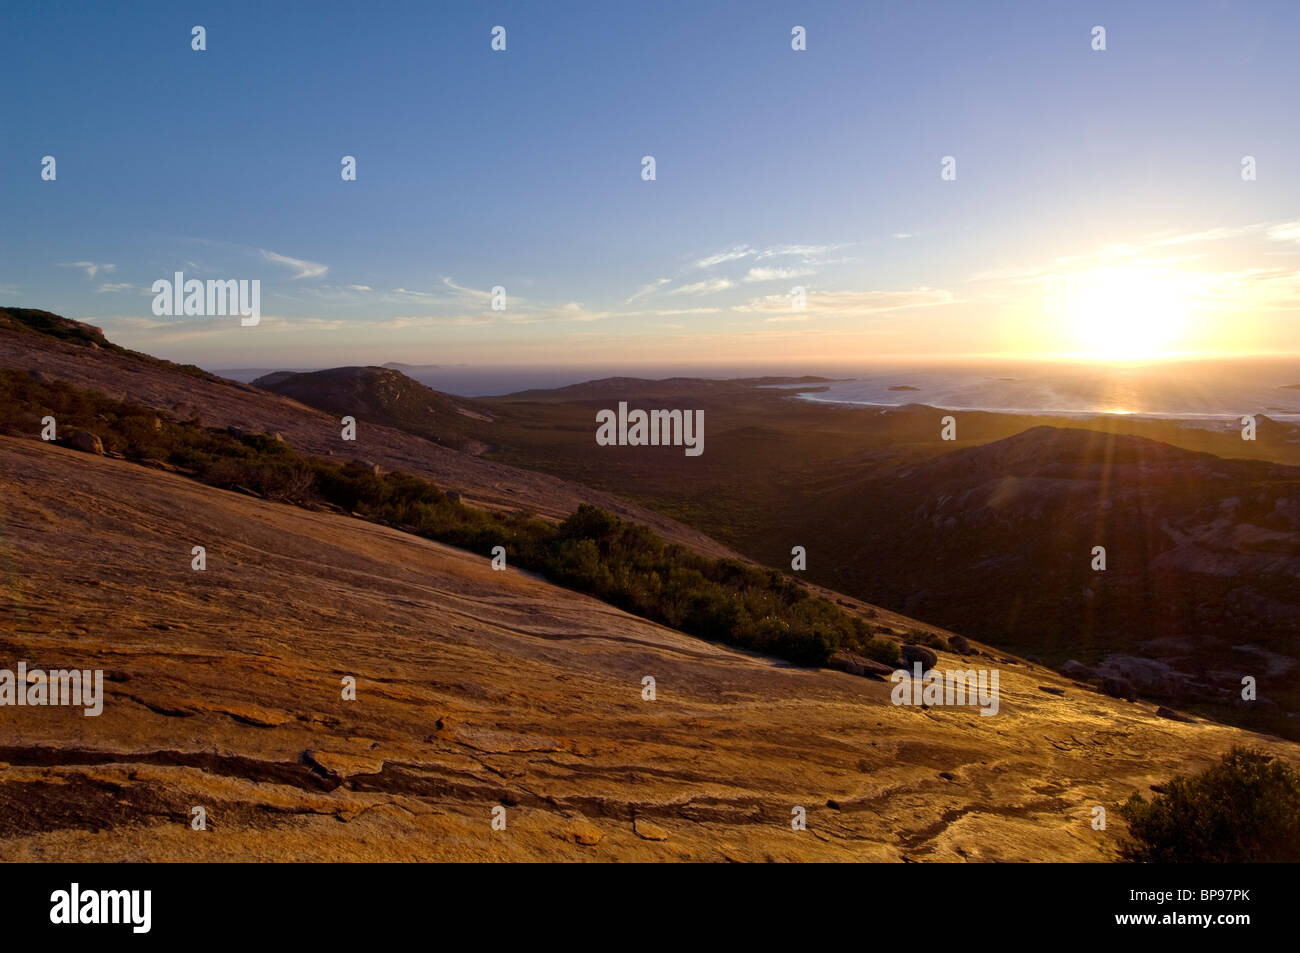 View from Mount Arid at sunset, Cape Arid National Park, Western Australia. Stock Photo